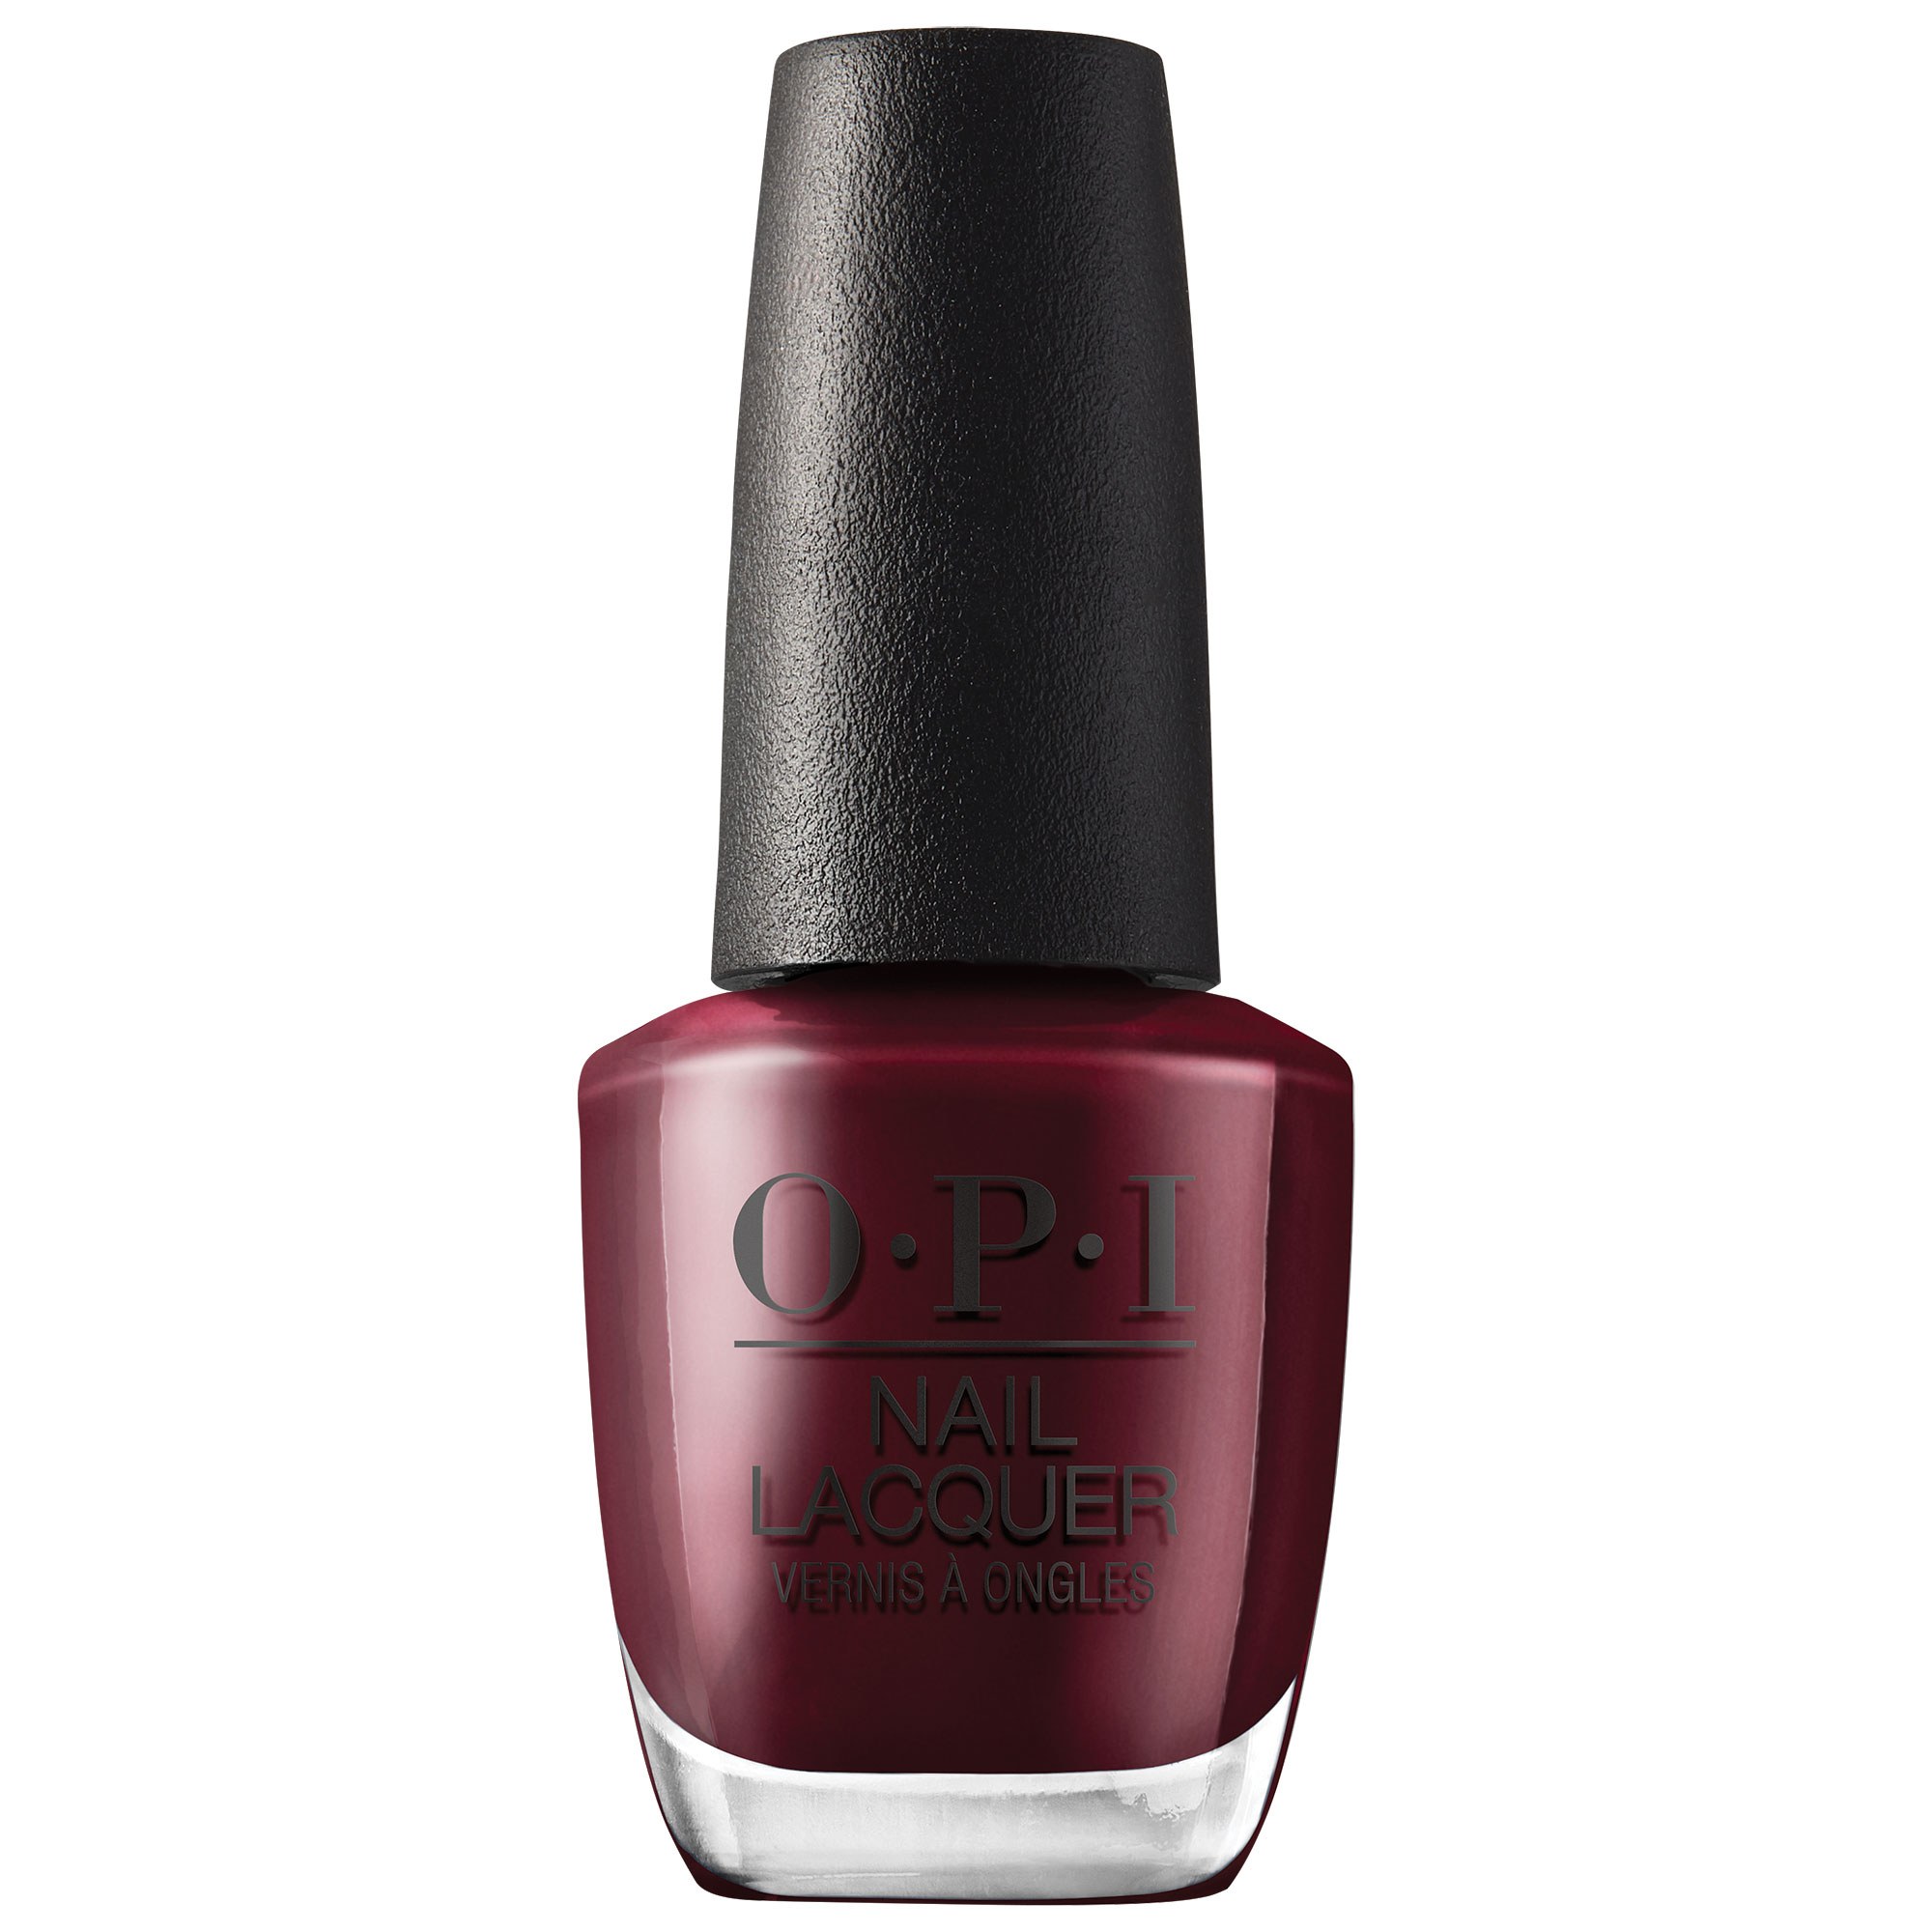 OPI Muse of Milan - Complimentary Wine